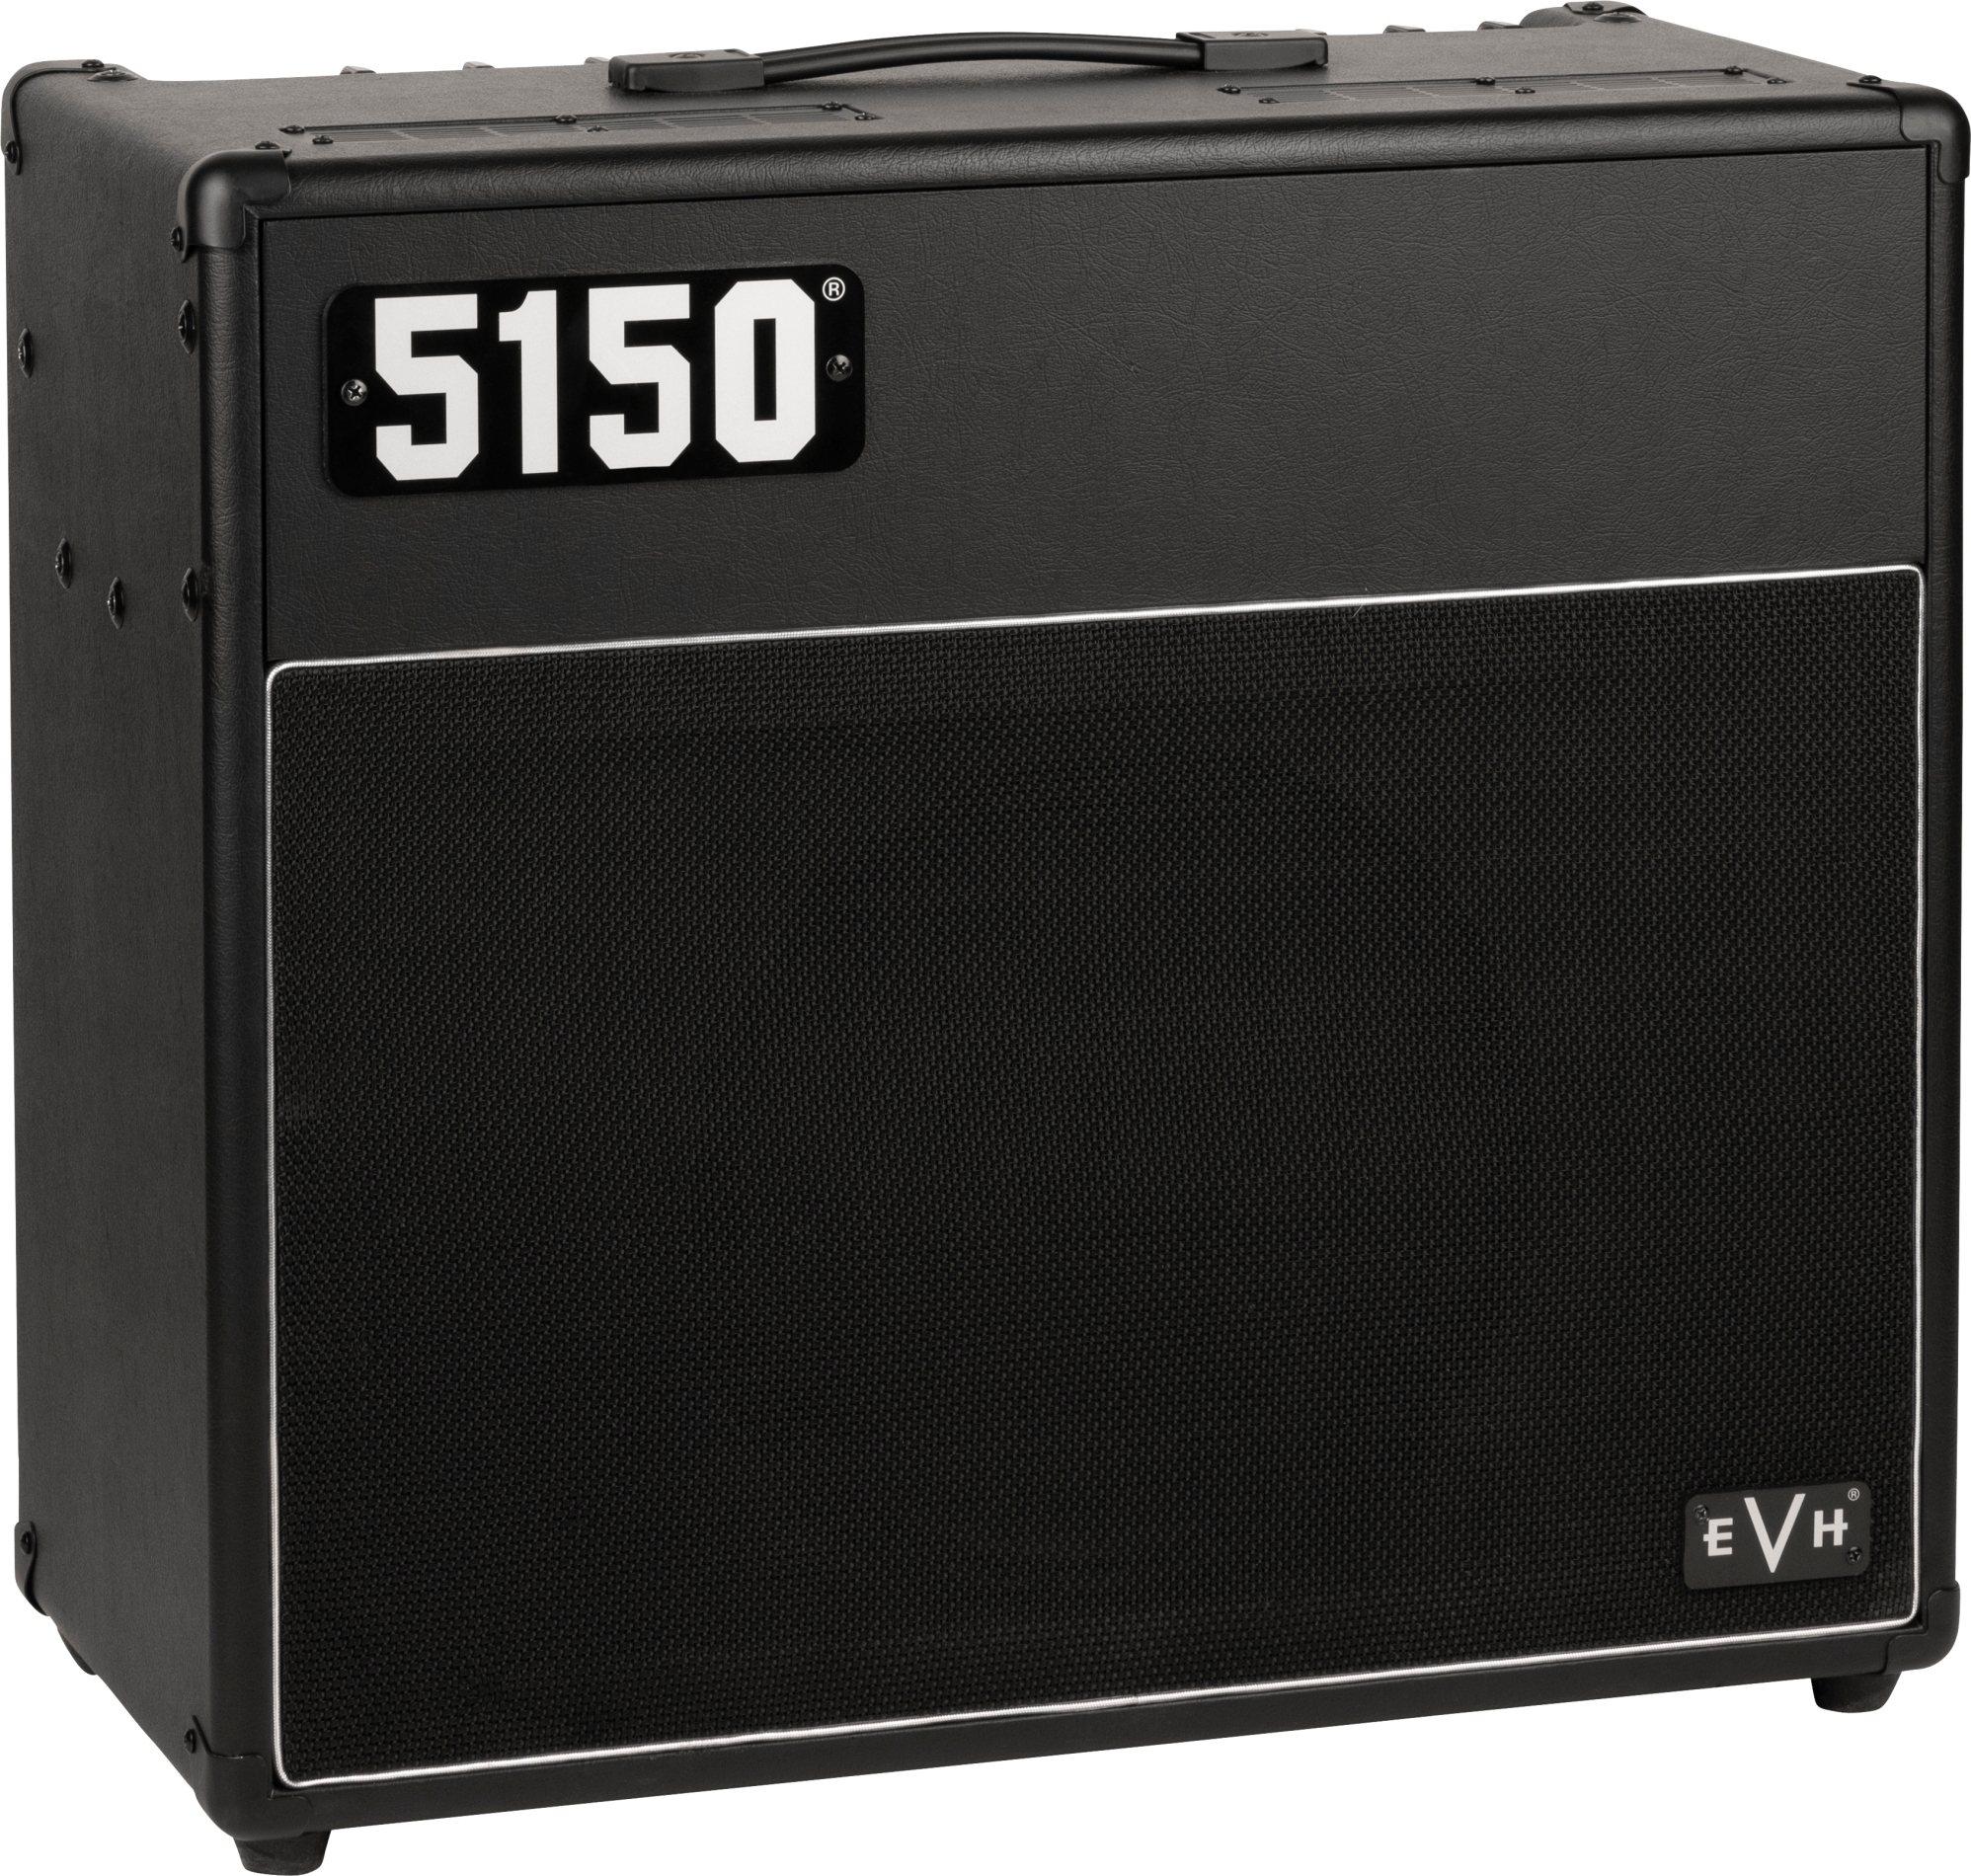 Evh 5150 Iconic Combo Black 40w 1x12 - Electric guitar combo amp - Main picture